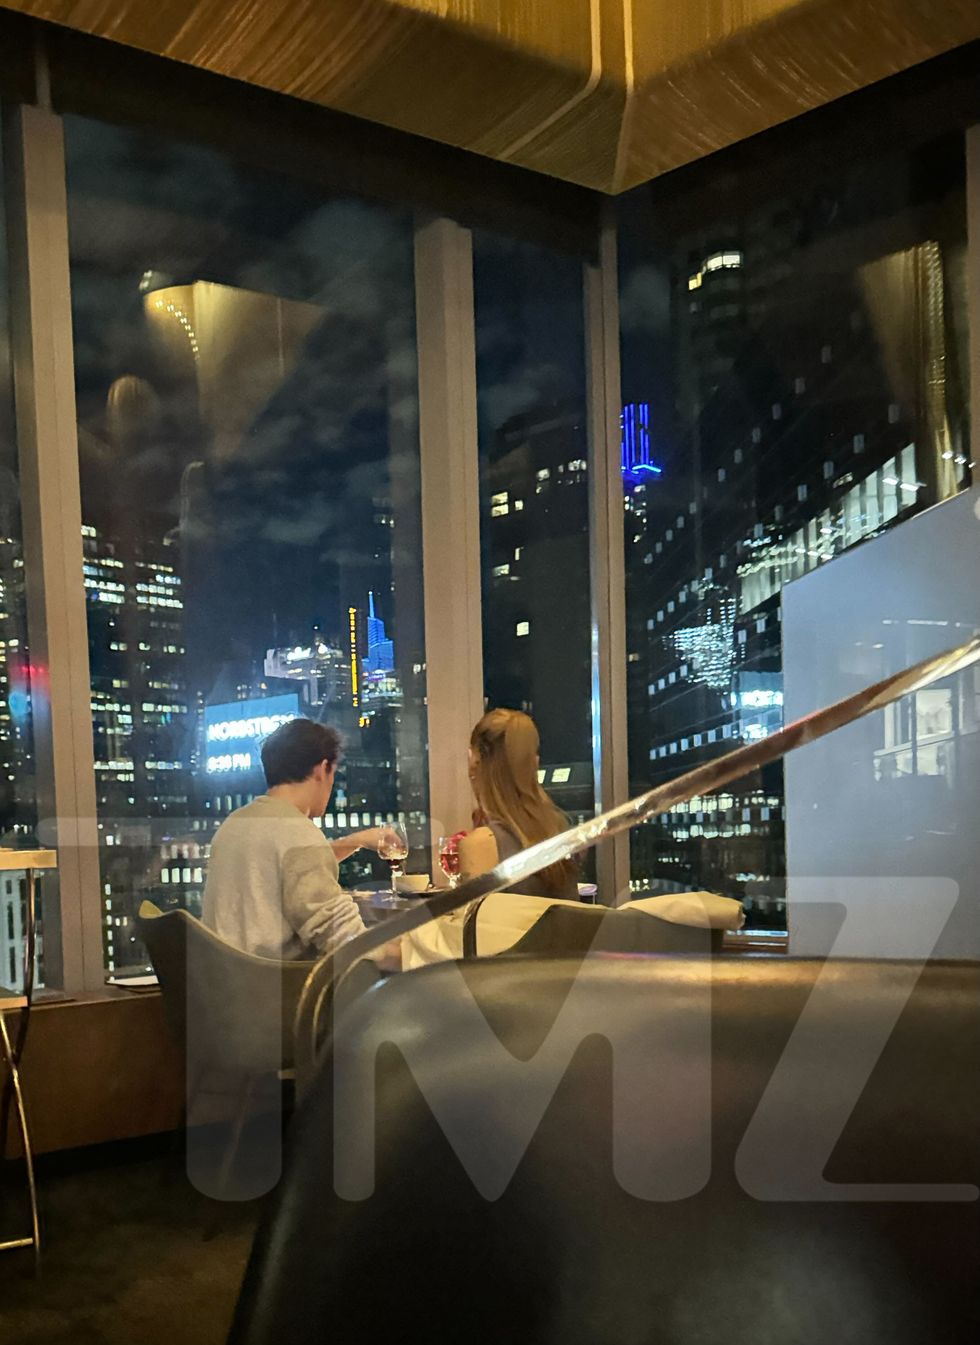 ariana grande and ethan slater on dinner date